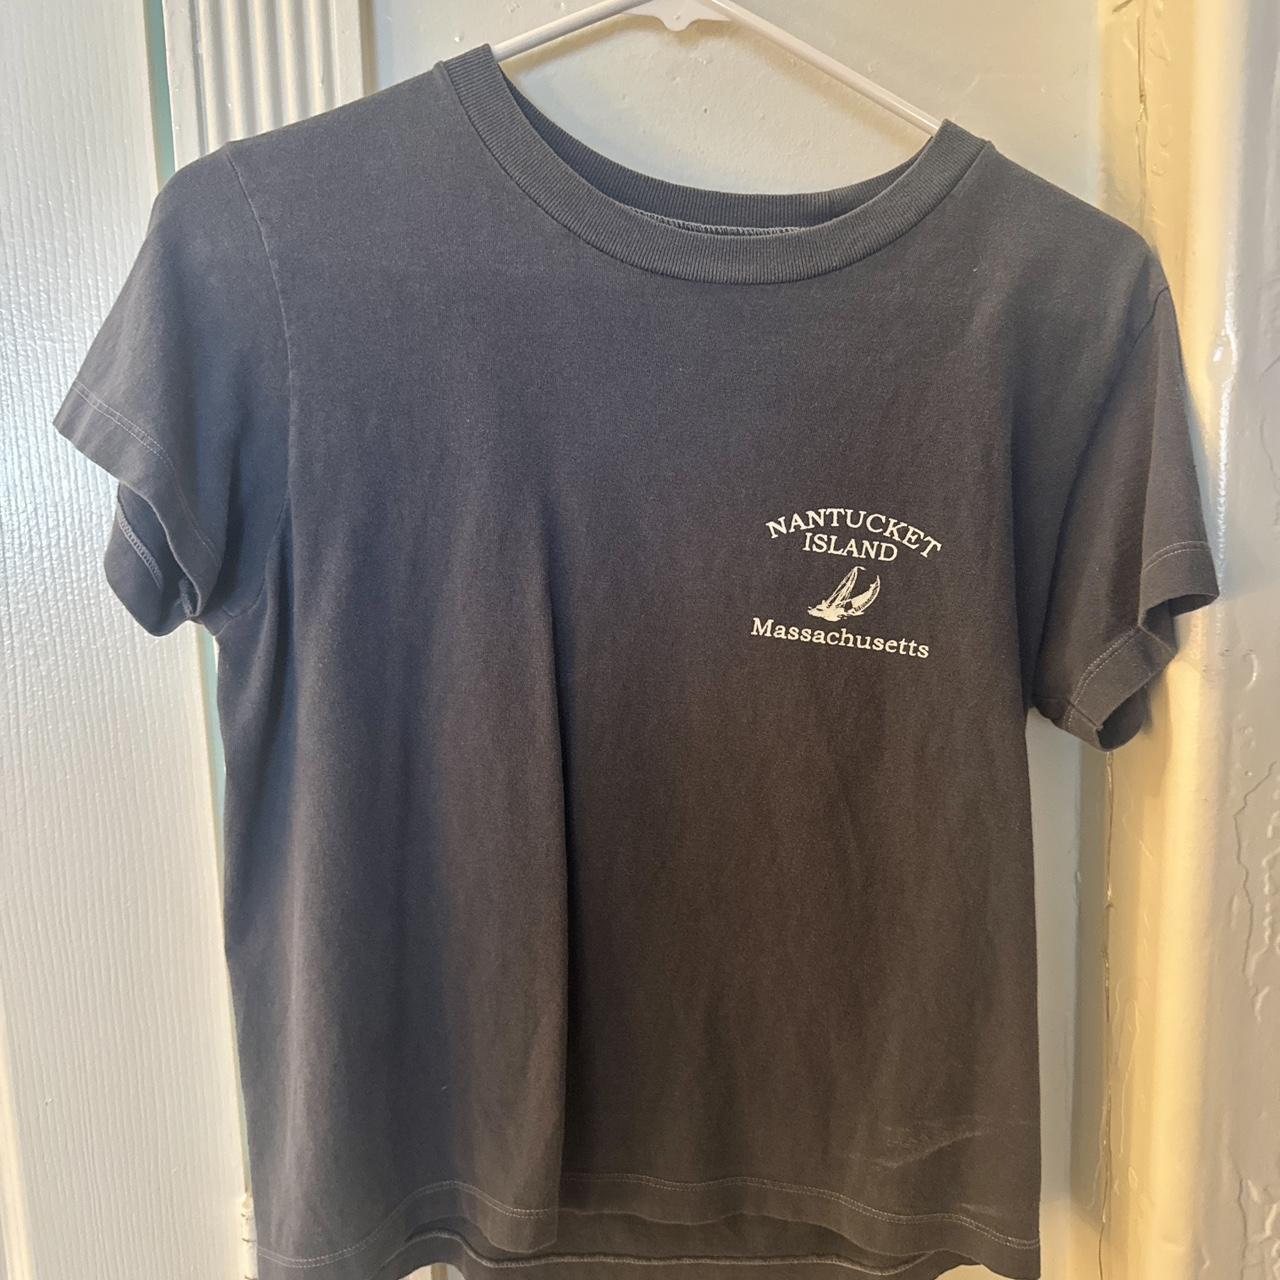 Brandy Melville white ribbed baby tee with V cut-out - Depop